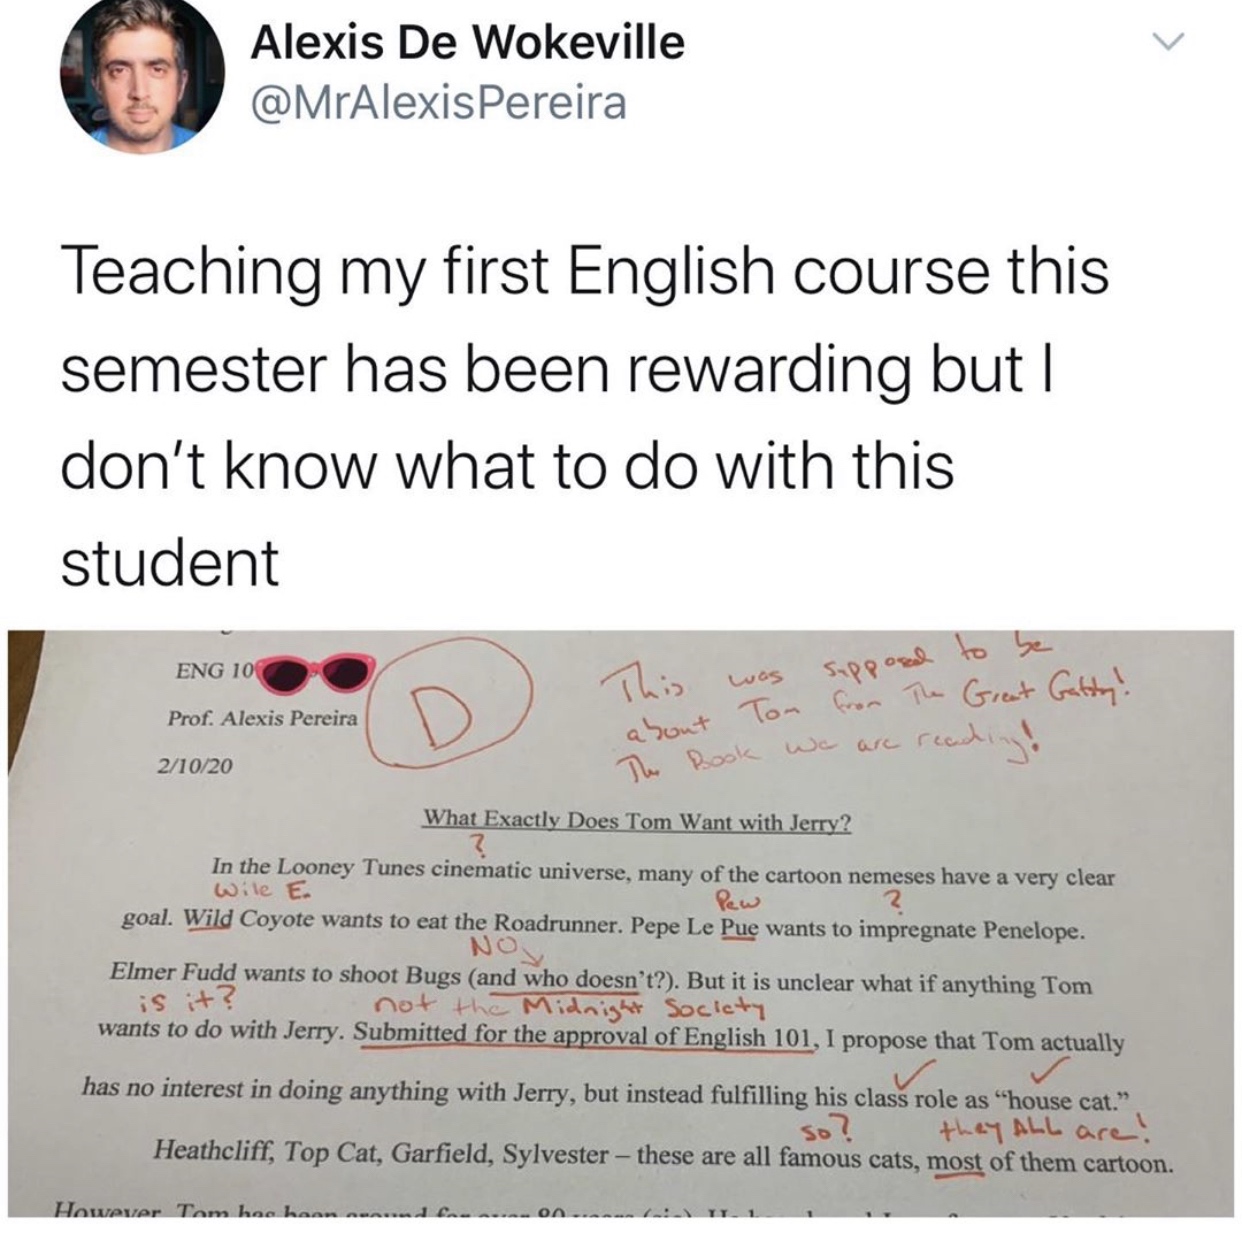 writing - Alexis De Wokeville Pereira Teaching my first English course this semester has been rewarding but | don't know what to do with this student Eng 100 Gatin! Prof. Alexis Pereira This was supposed to be Tom from The Great The Book we are reading! 2